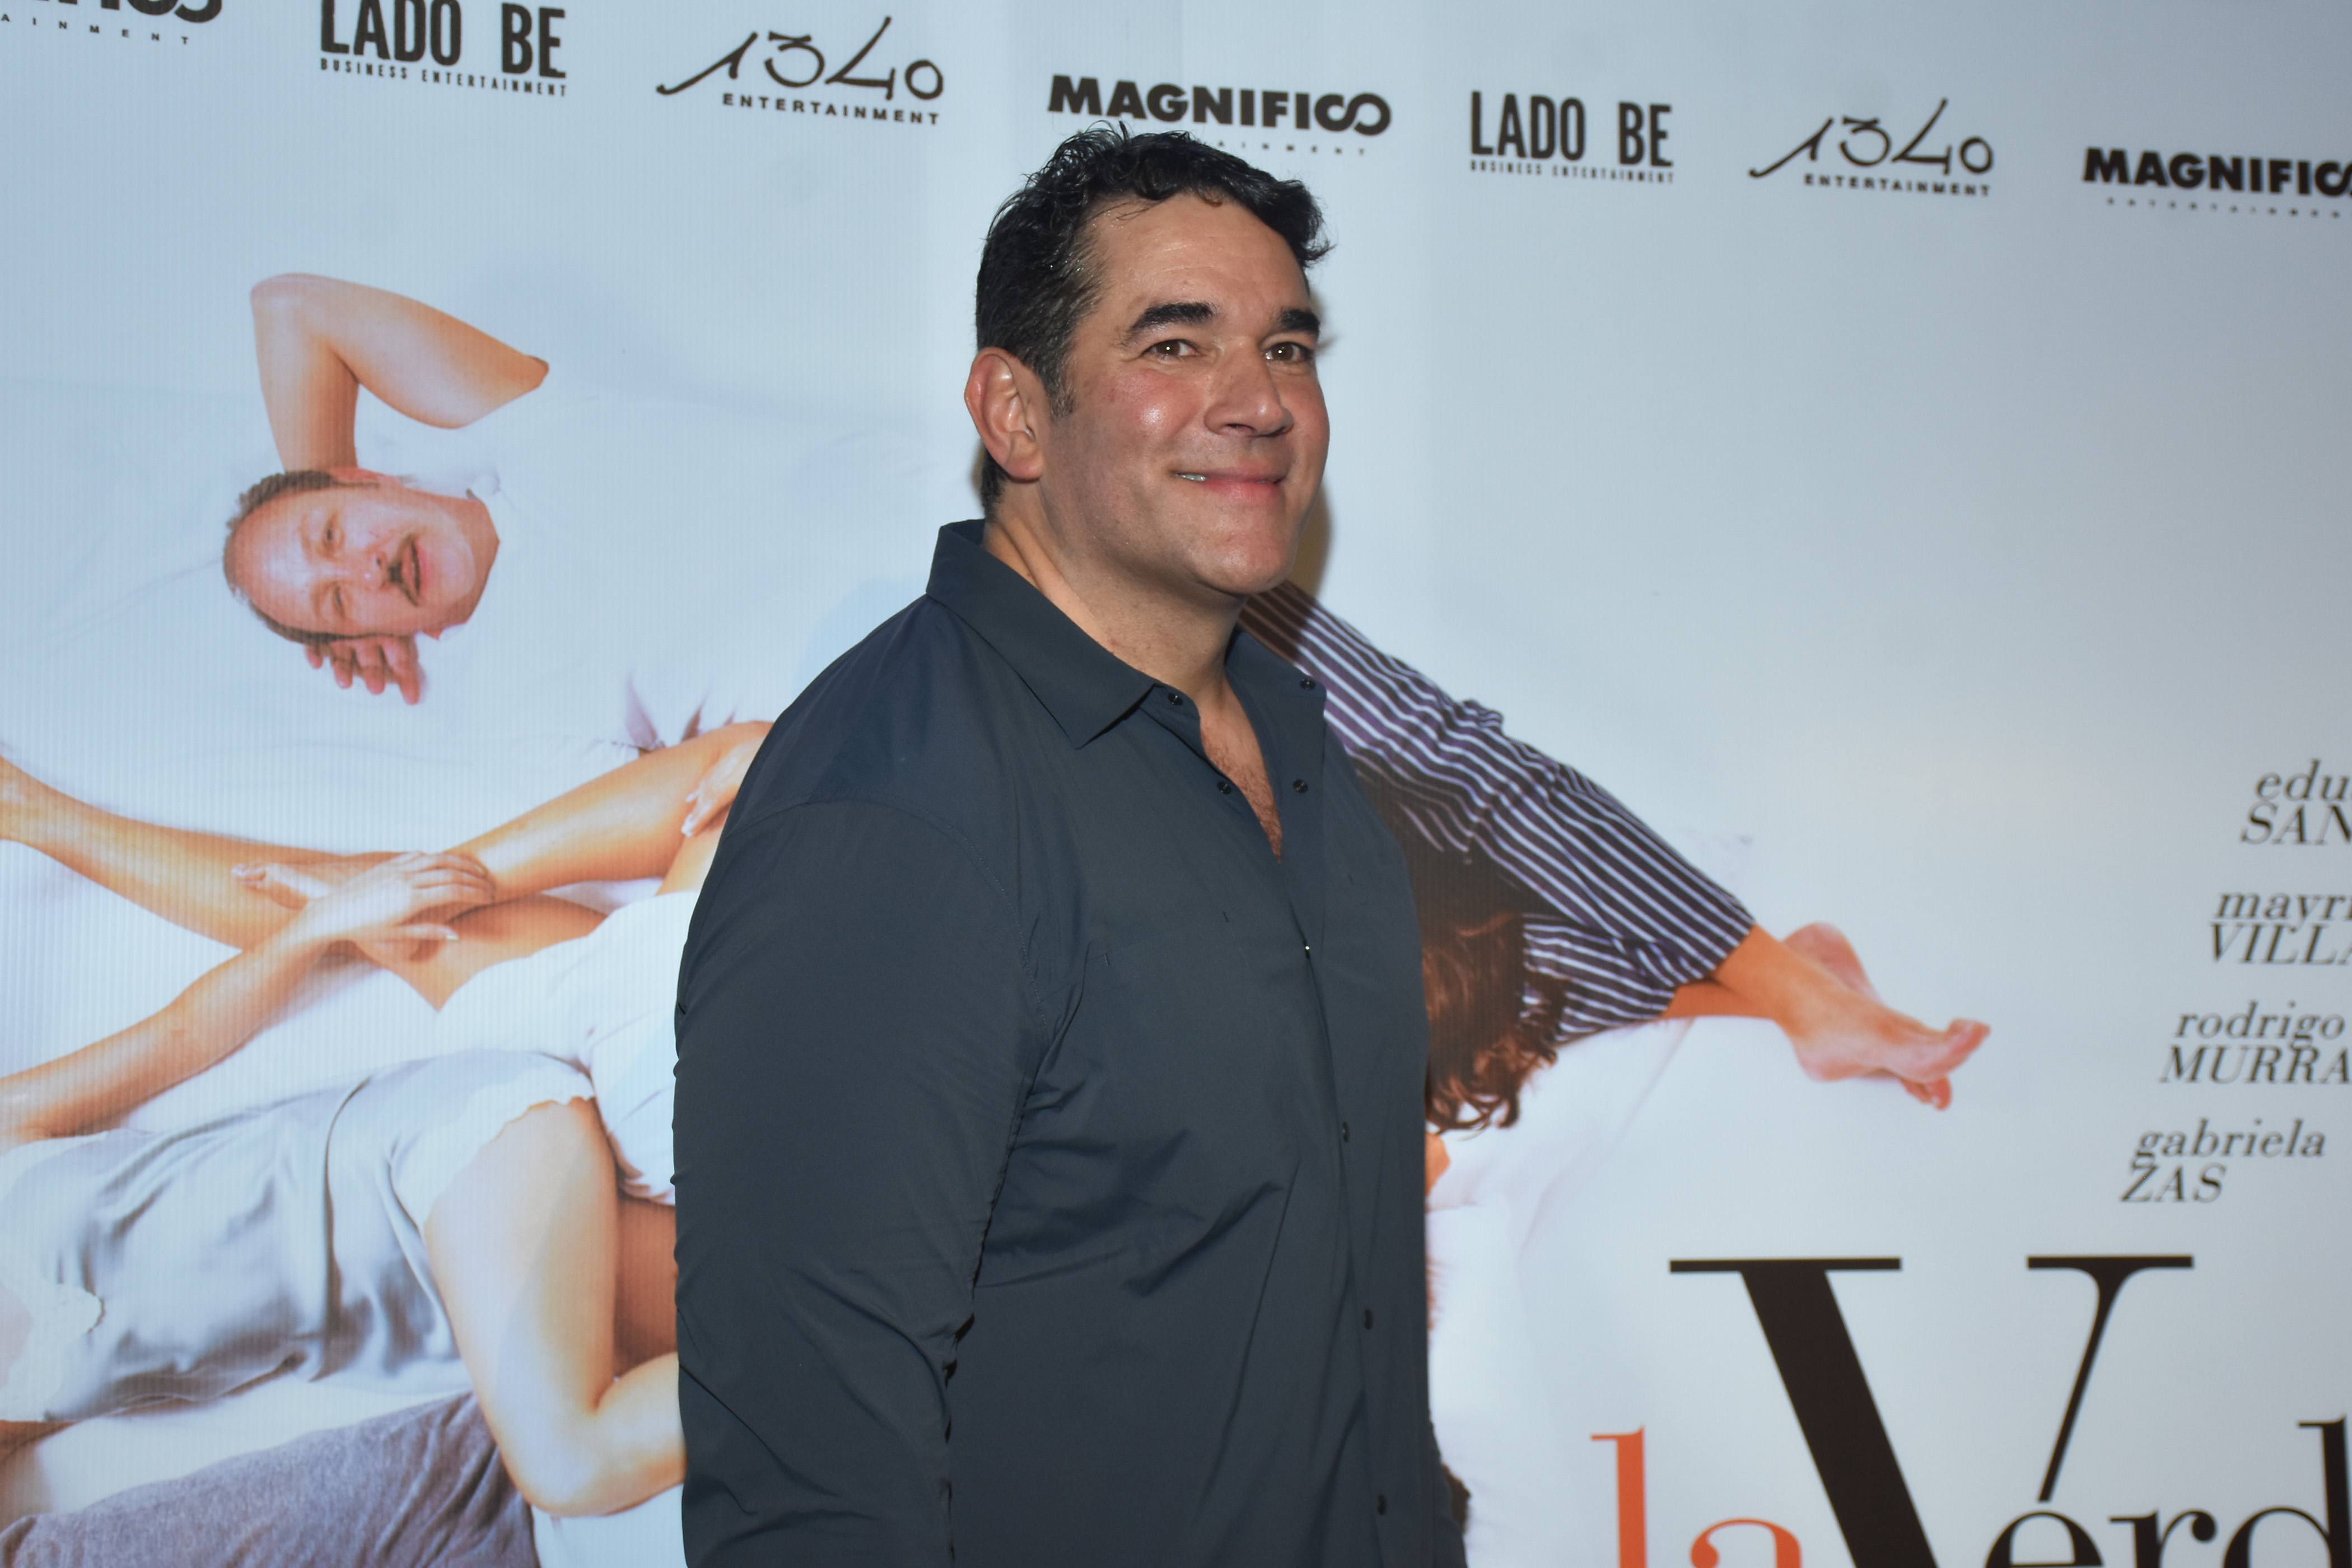 Eduardo Santamarina at a press conference to promote the theater play "La Verdad" on September 17, 2018, in Mexico | Source: Getty Images